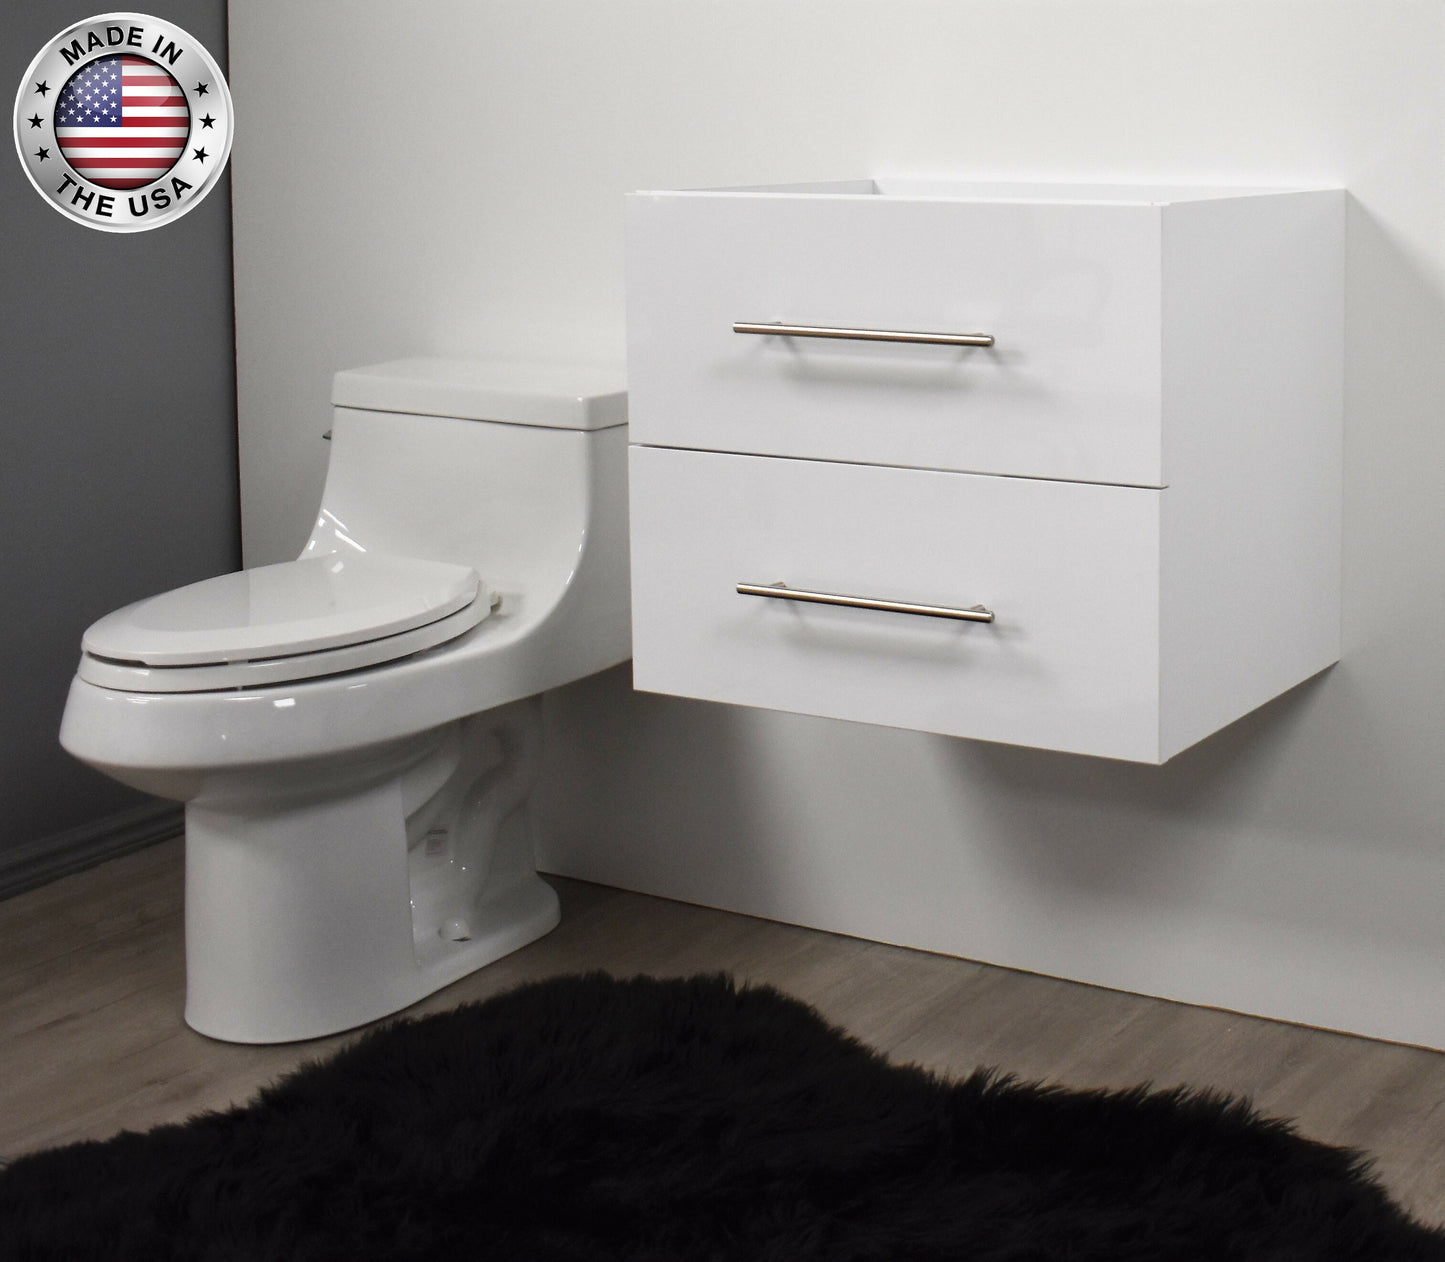 Volpa Napa 24" Modern Wall-Mounted Floating Bathroom Vanity with Round Handles Cabinet Only - Luxe Bathroom Vanities Luxury Bathroom Fixtures Bathroom Furniture